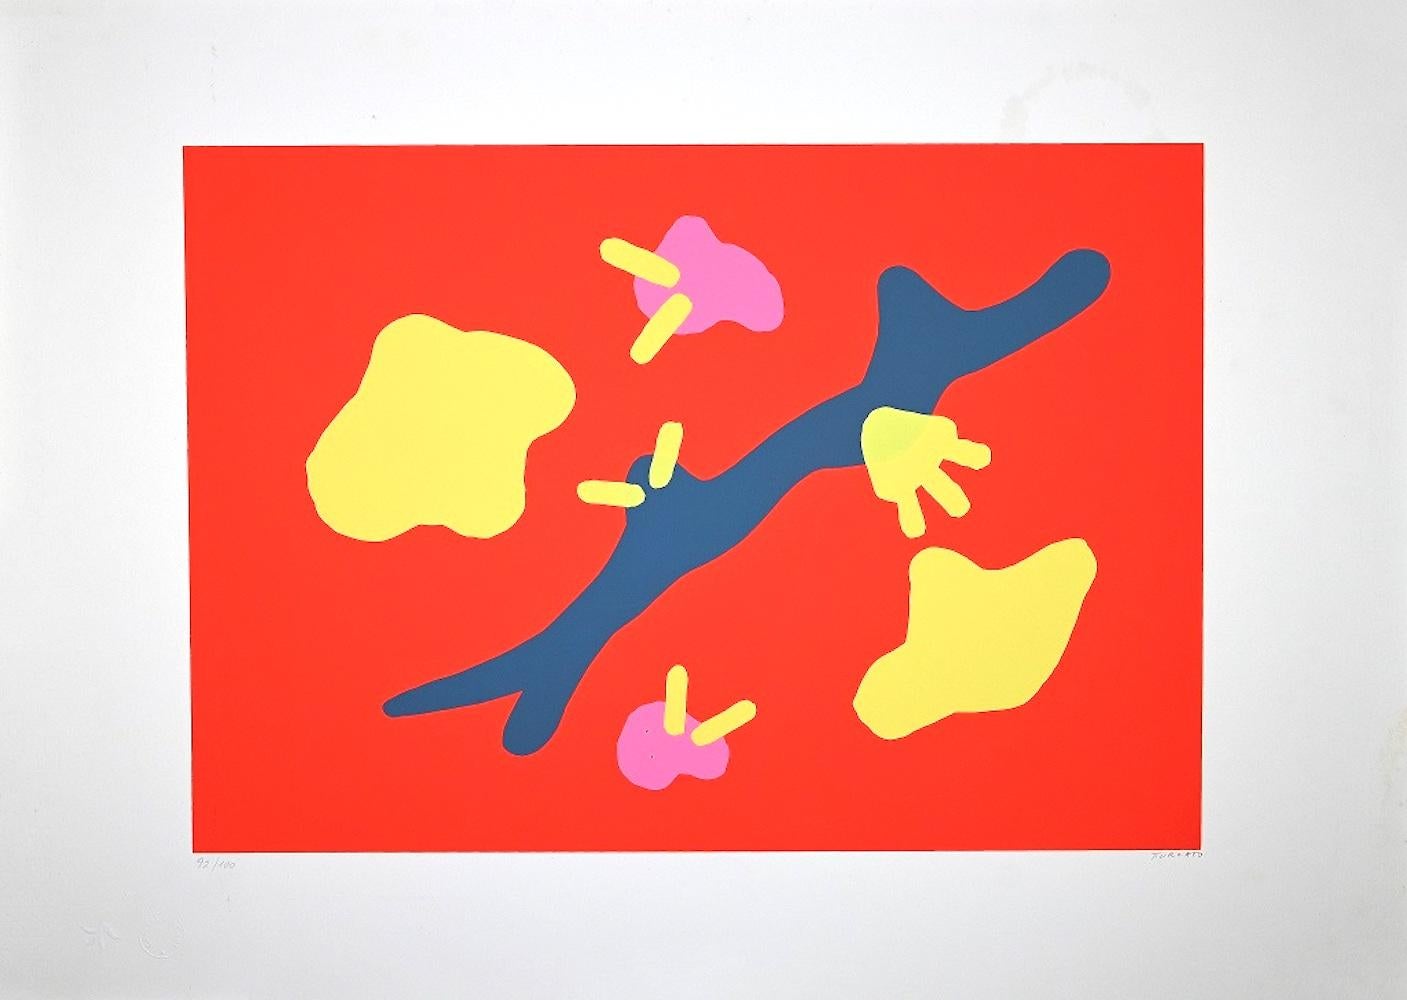 Composition in red  is a colored screen print realized by the contemporary artist Giulio Turcato.

Hand-signed in pencil on the lower right.

Numbered on the lower left margin, edition of 100 copies.

Giulio Turcato (1912 - 1995) was an Italian